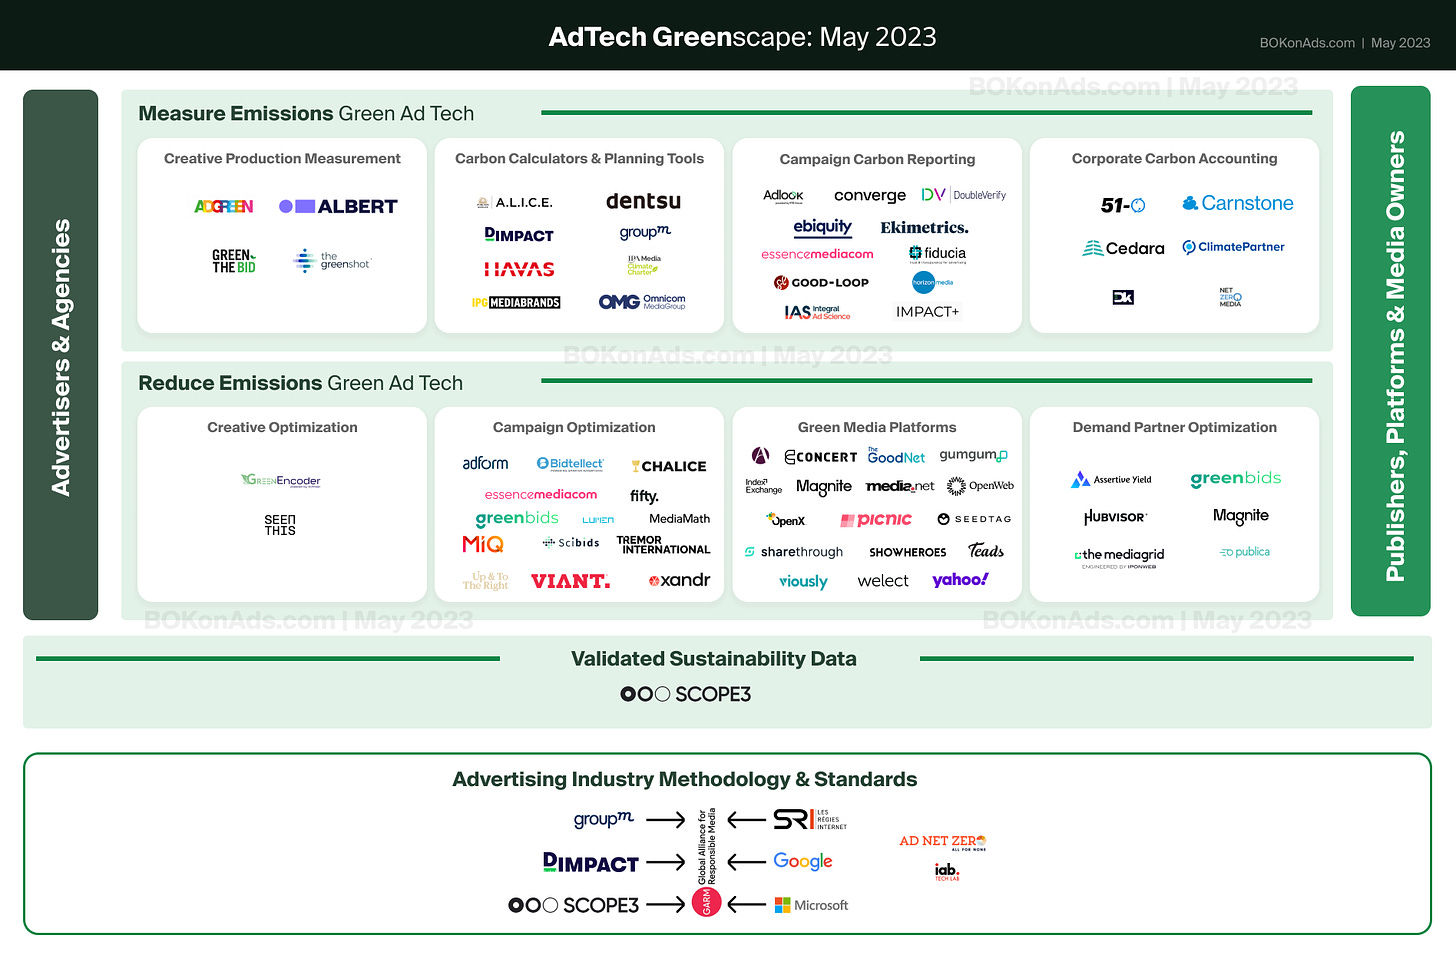 The AdTech Greenscape